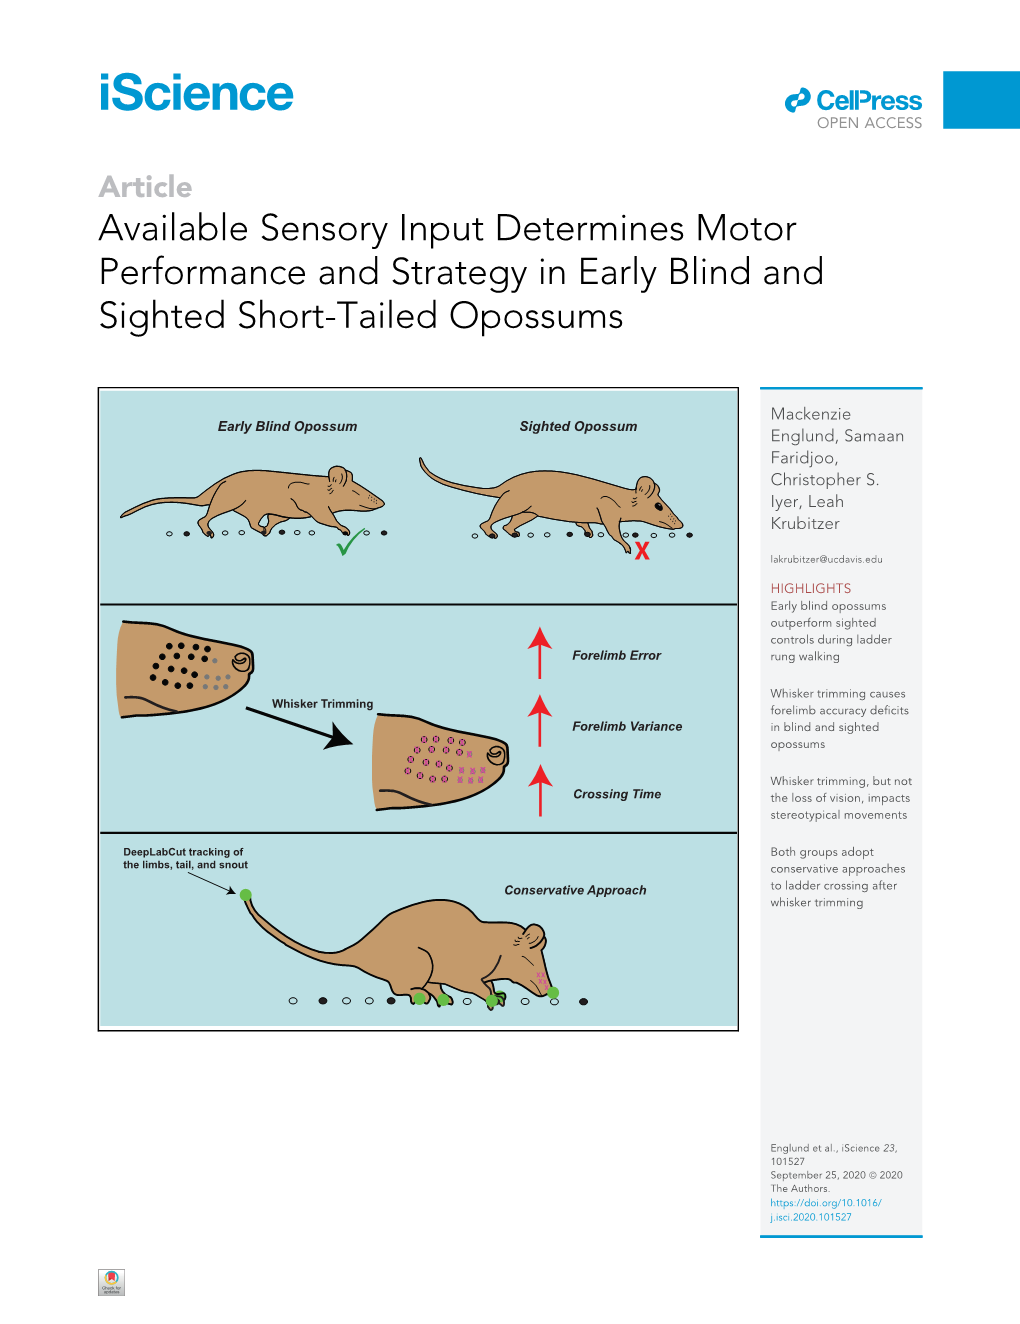 Available Sensory Input Determines Motor Performance and Strategy in Early Blind and Sighted Short-Tailed Opossums